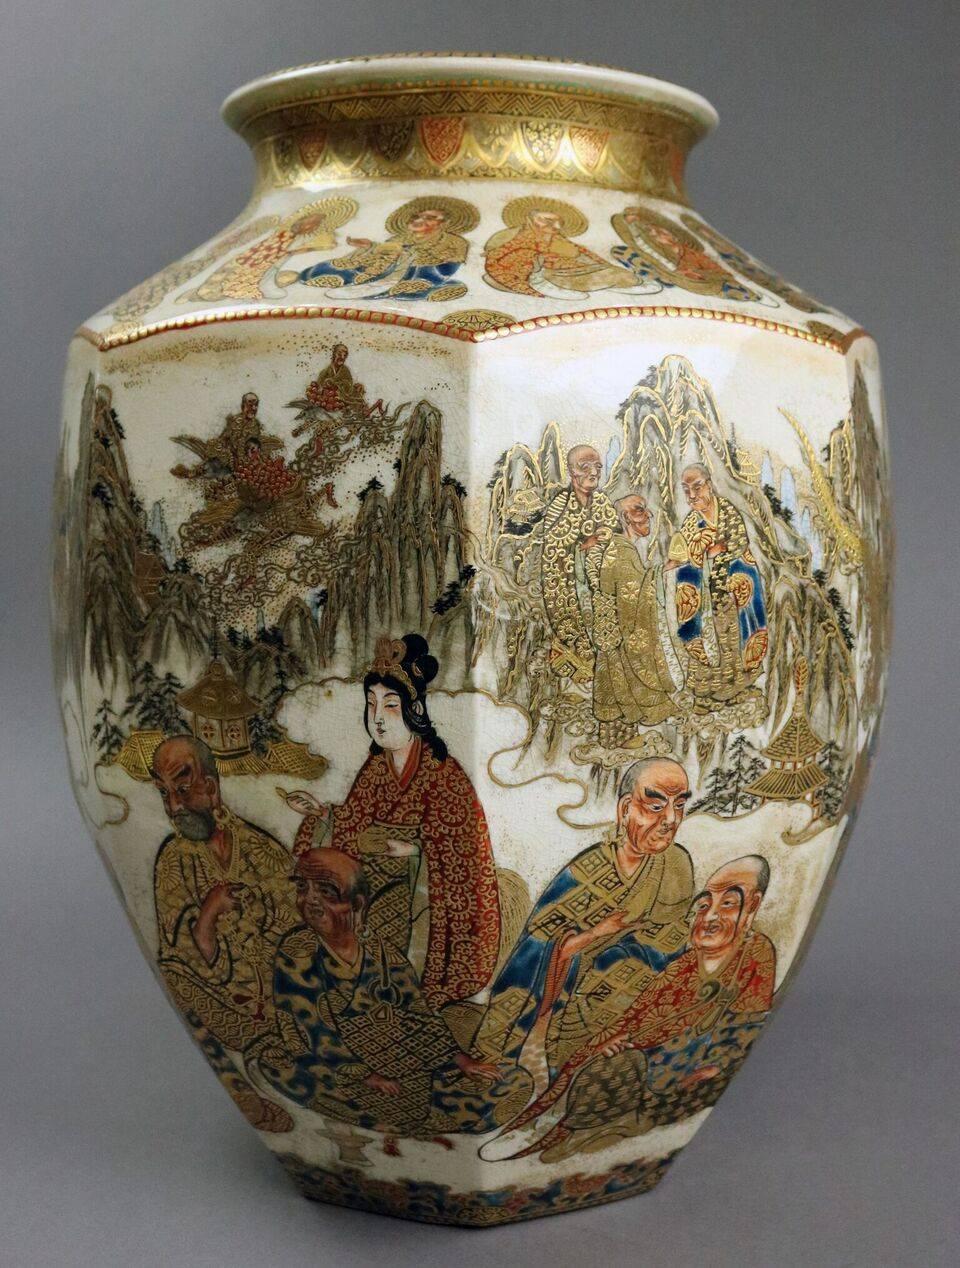 Japanese ceramic Satsuma vase of the Meiji period features hand-painted moriage and gold gilt village scenes, early 19th century